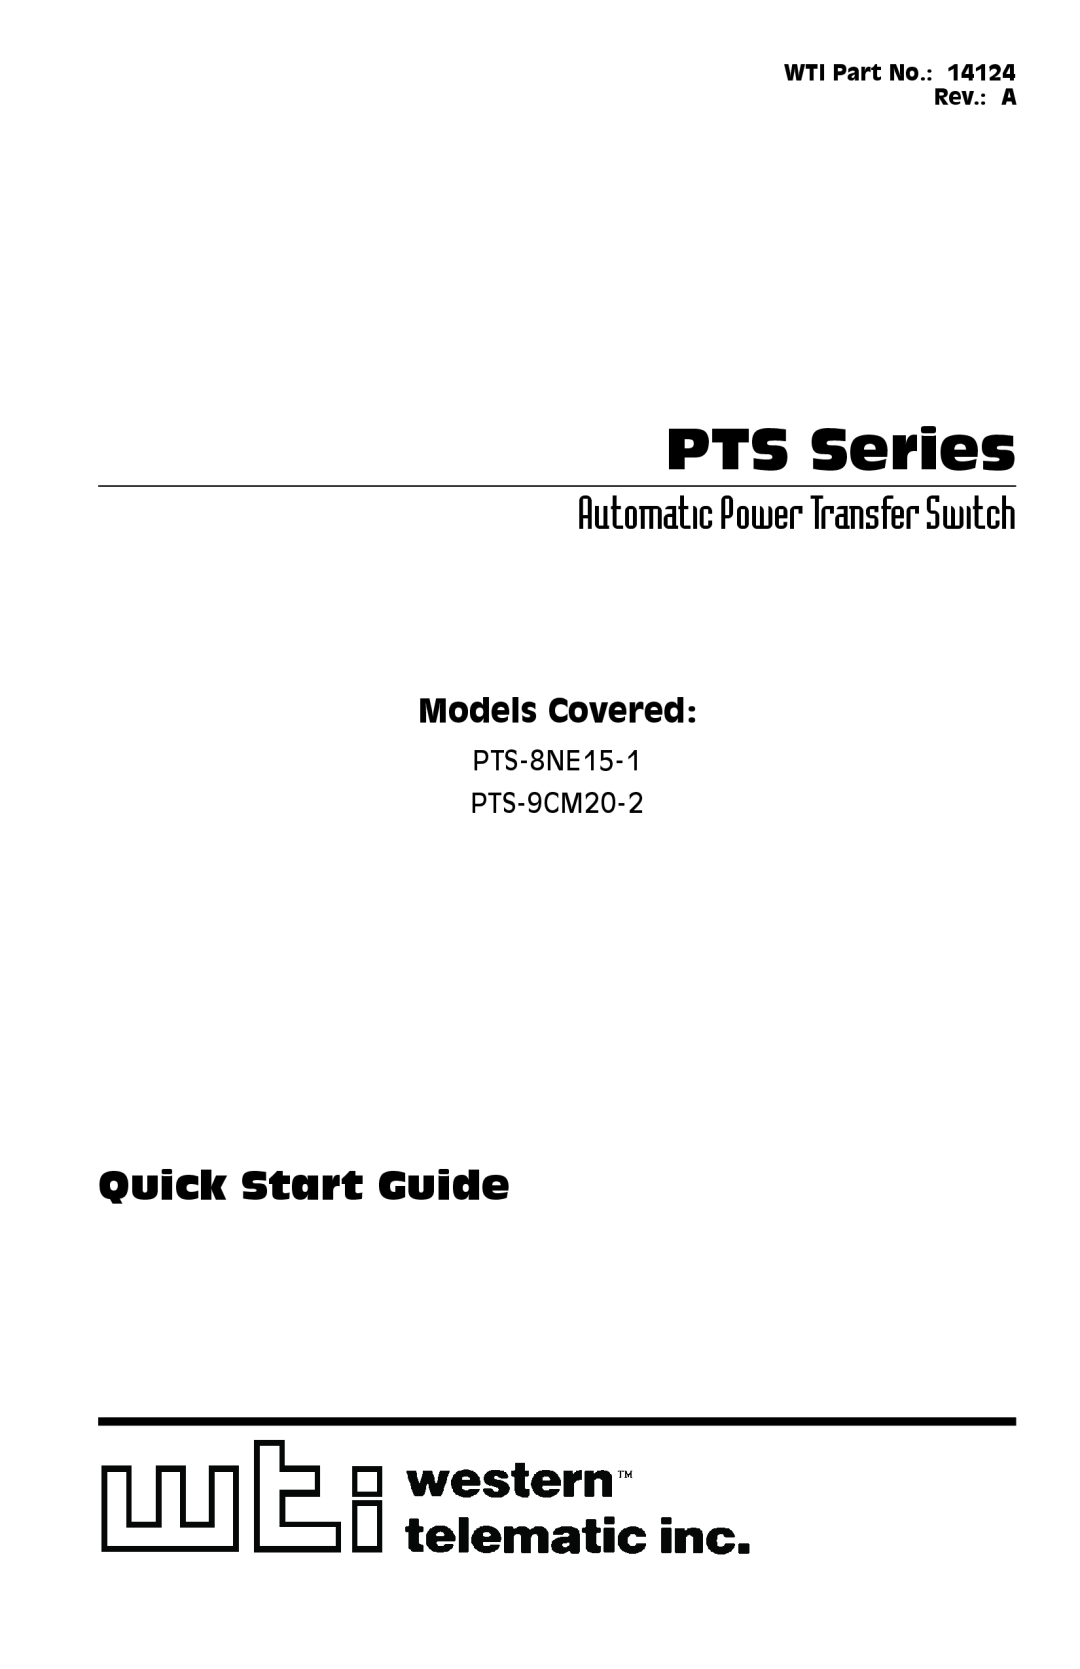 Western Telematic quick start Models Covered, PTS-8NE15-1 PTS-9CM20-2, PTS Series, Automatic Power Transfer Switch 